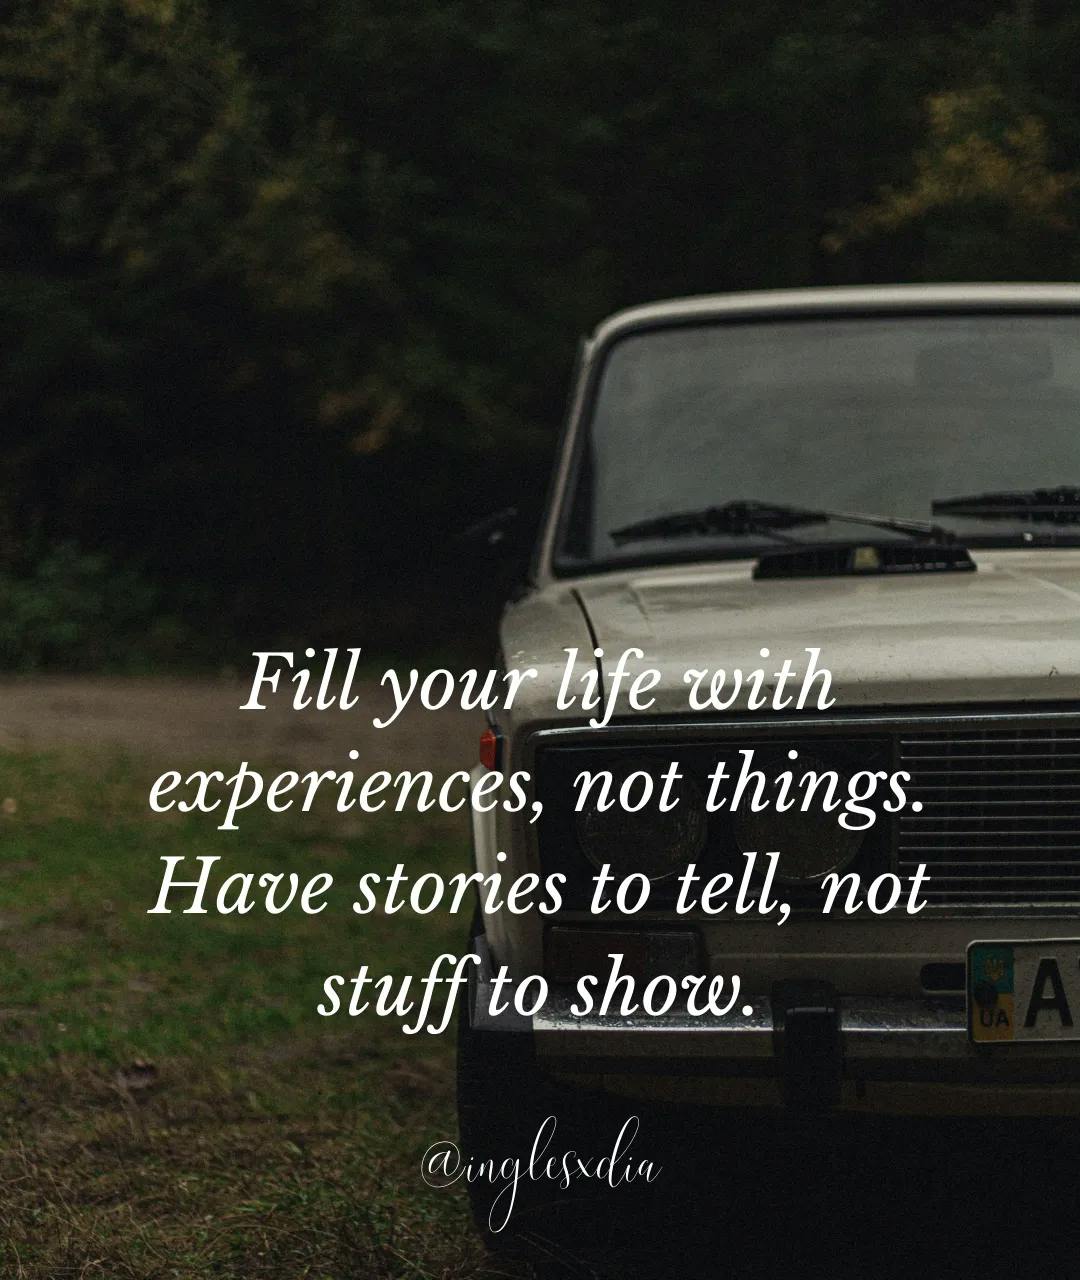 Frases motivadoras en inglés: Fill your life with experiences, not things. Have stories to tell, not stuff to show.